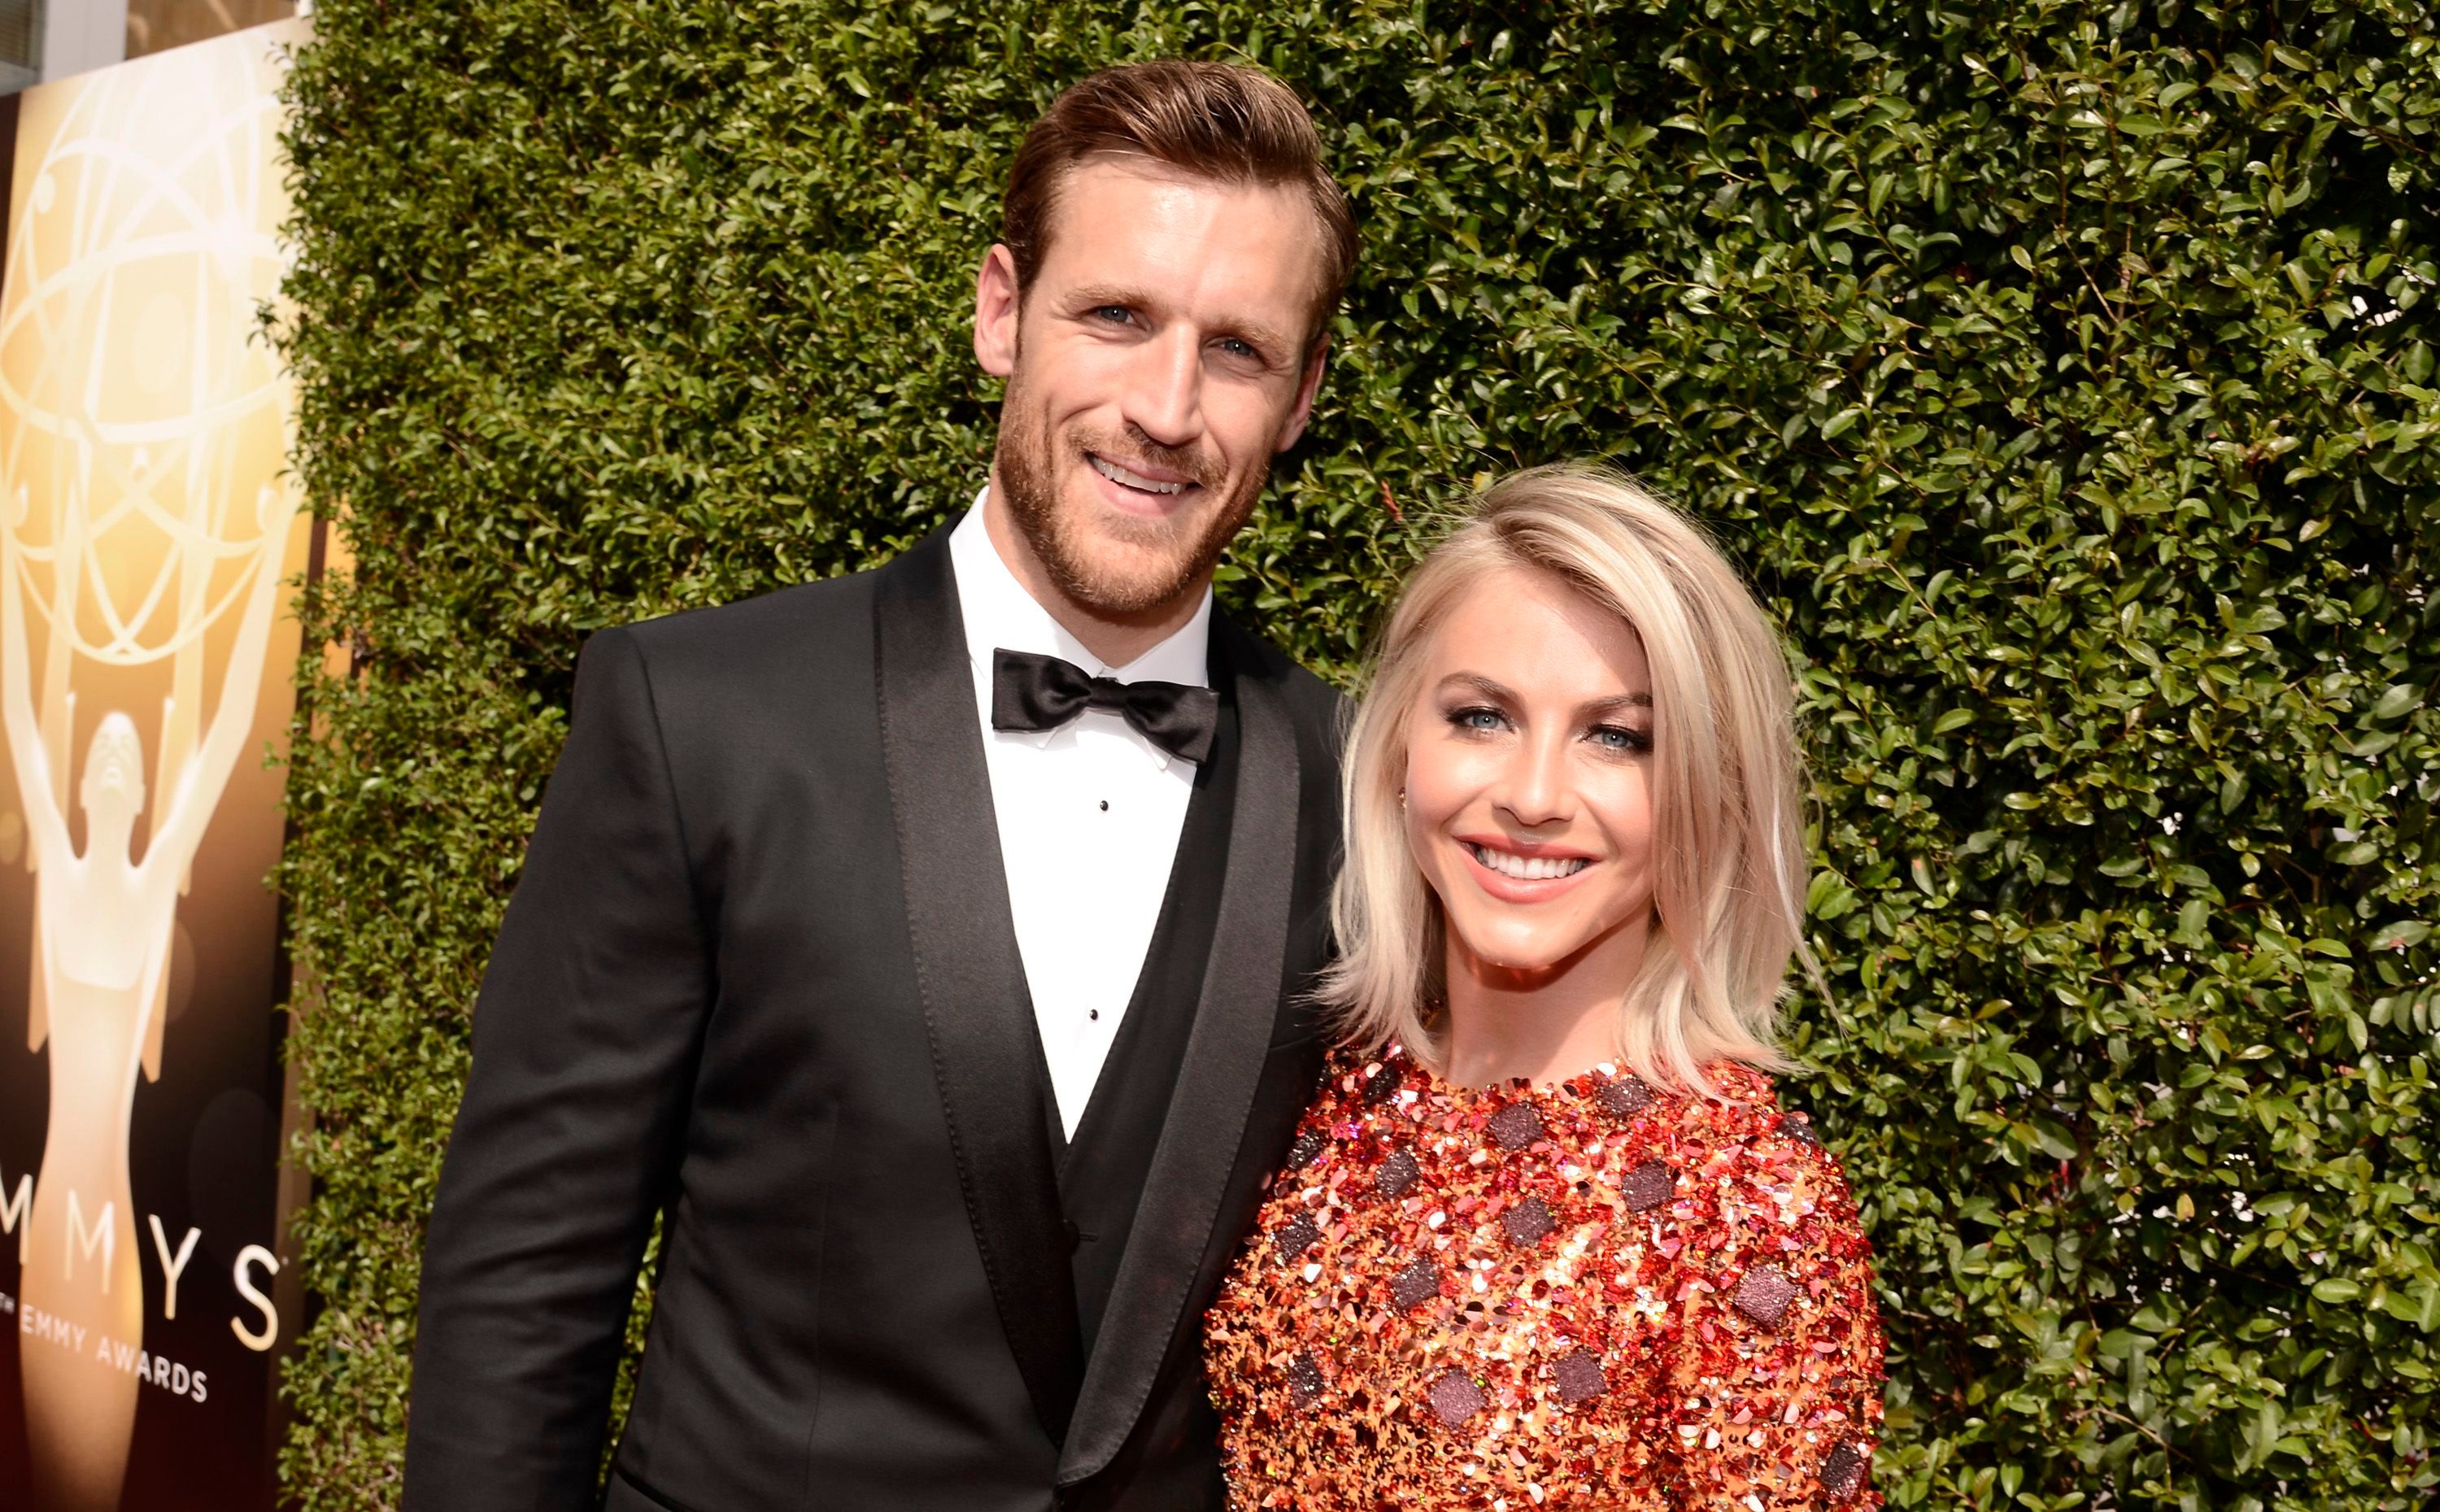 Julianne Hough and husband Brooks Laich split after three years of marriage  – The US Sun